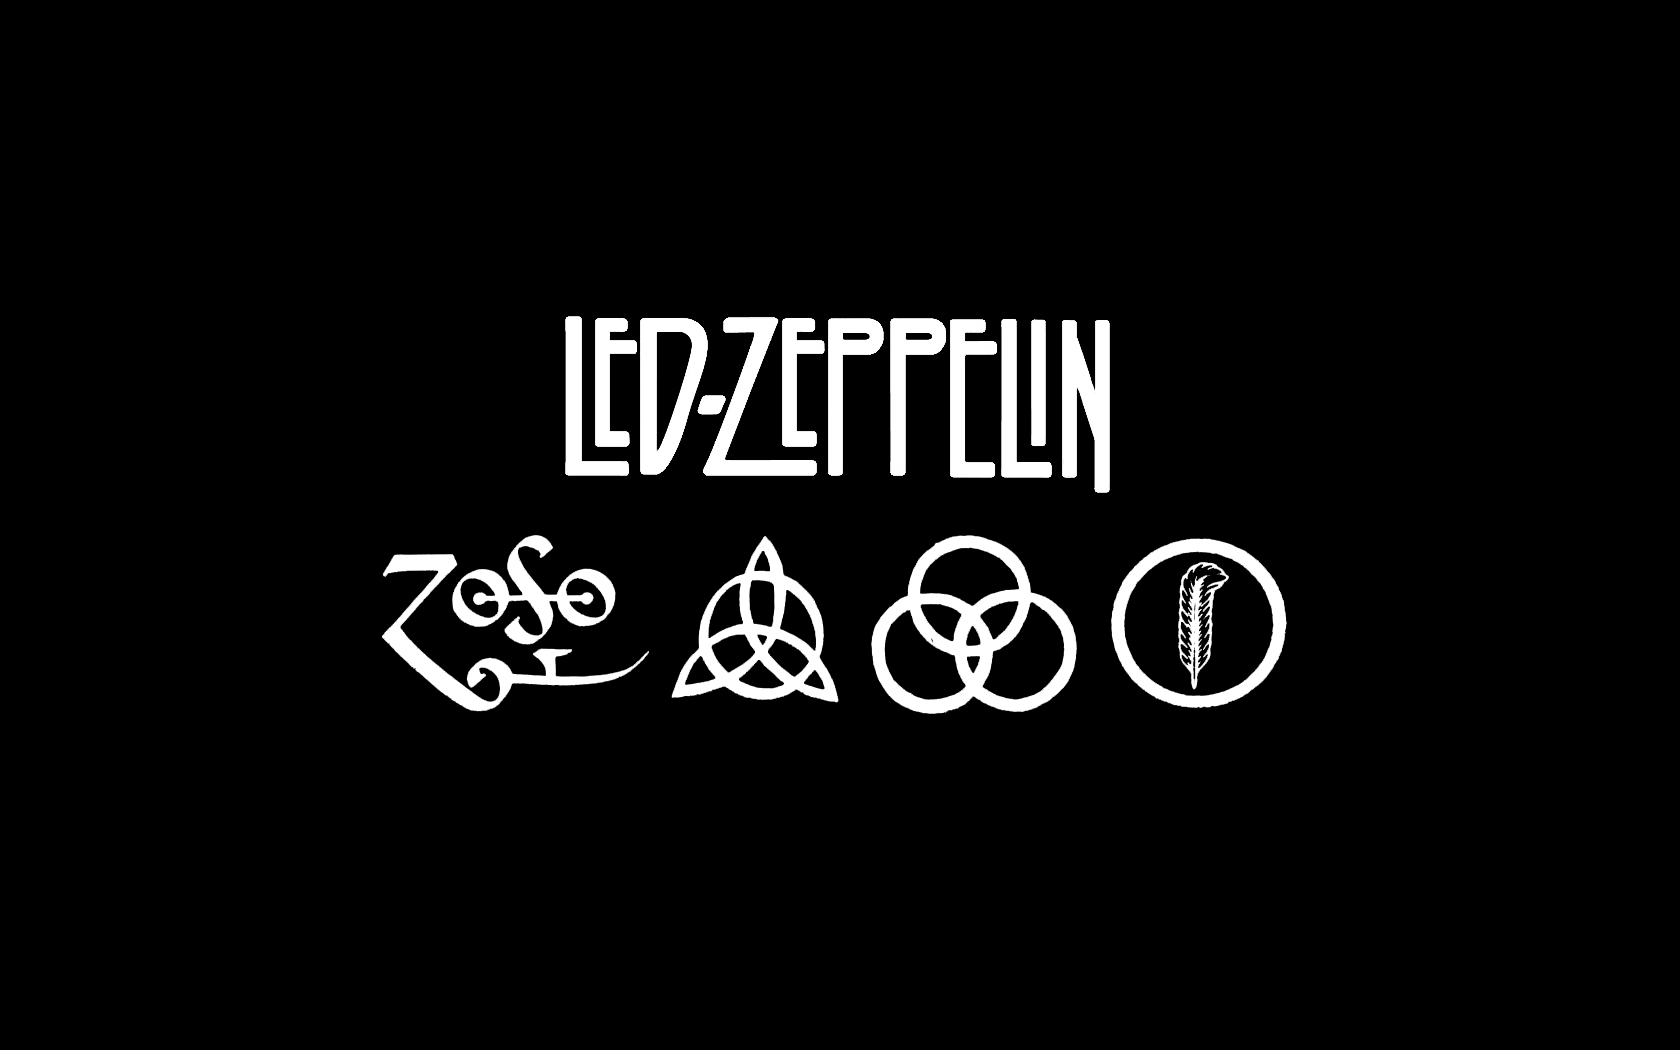 38 Led Zeppelin Wallpapers Backgrounds - Wallpaper Abyss